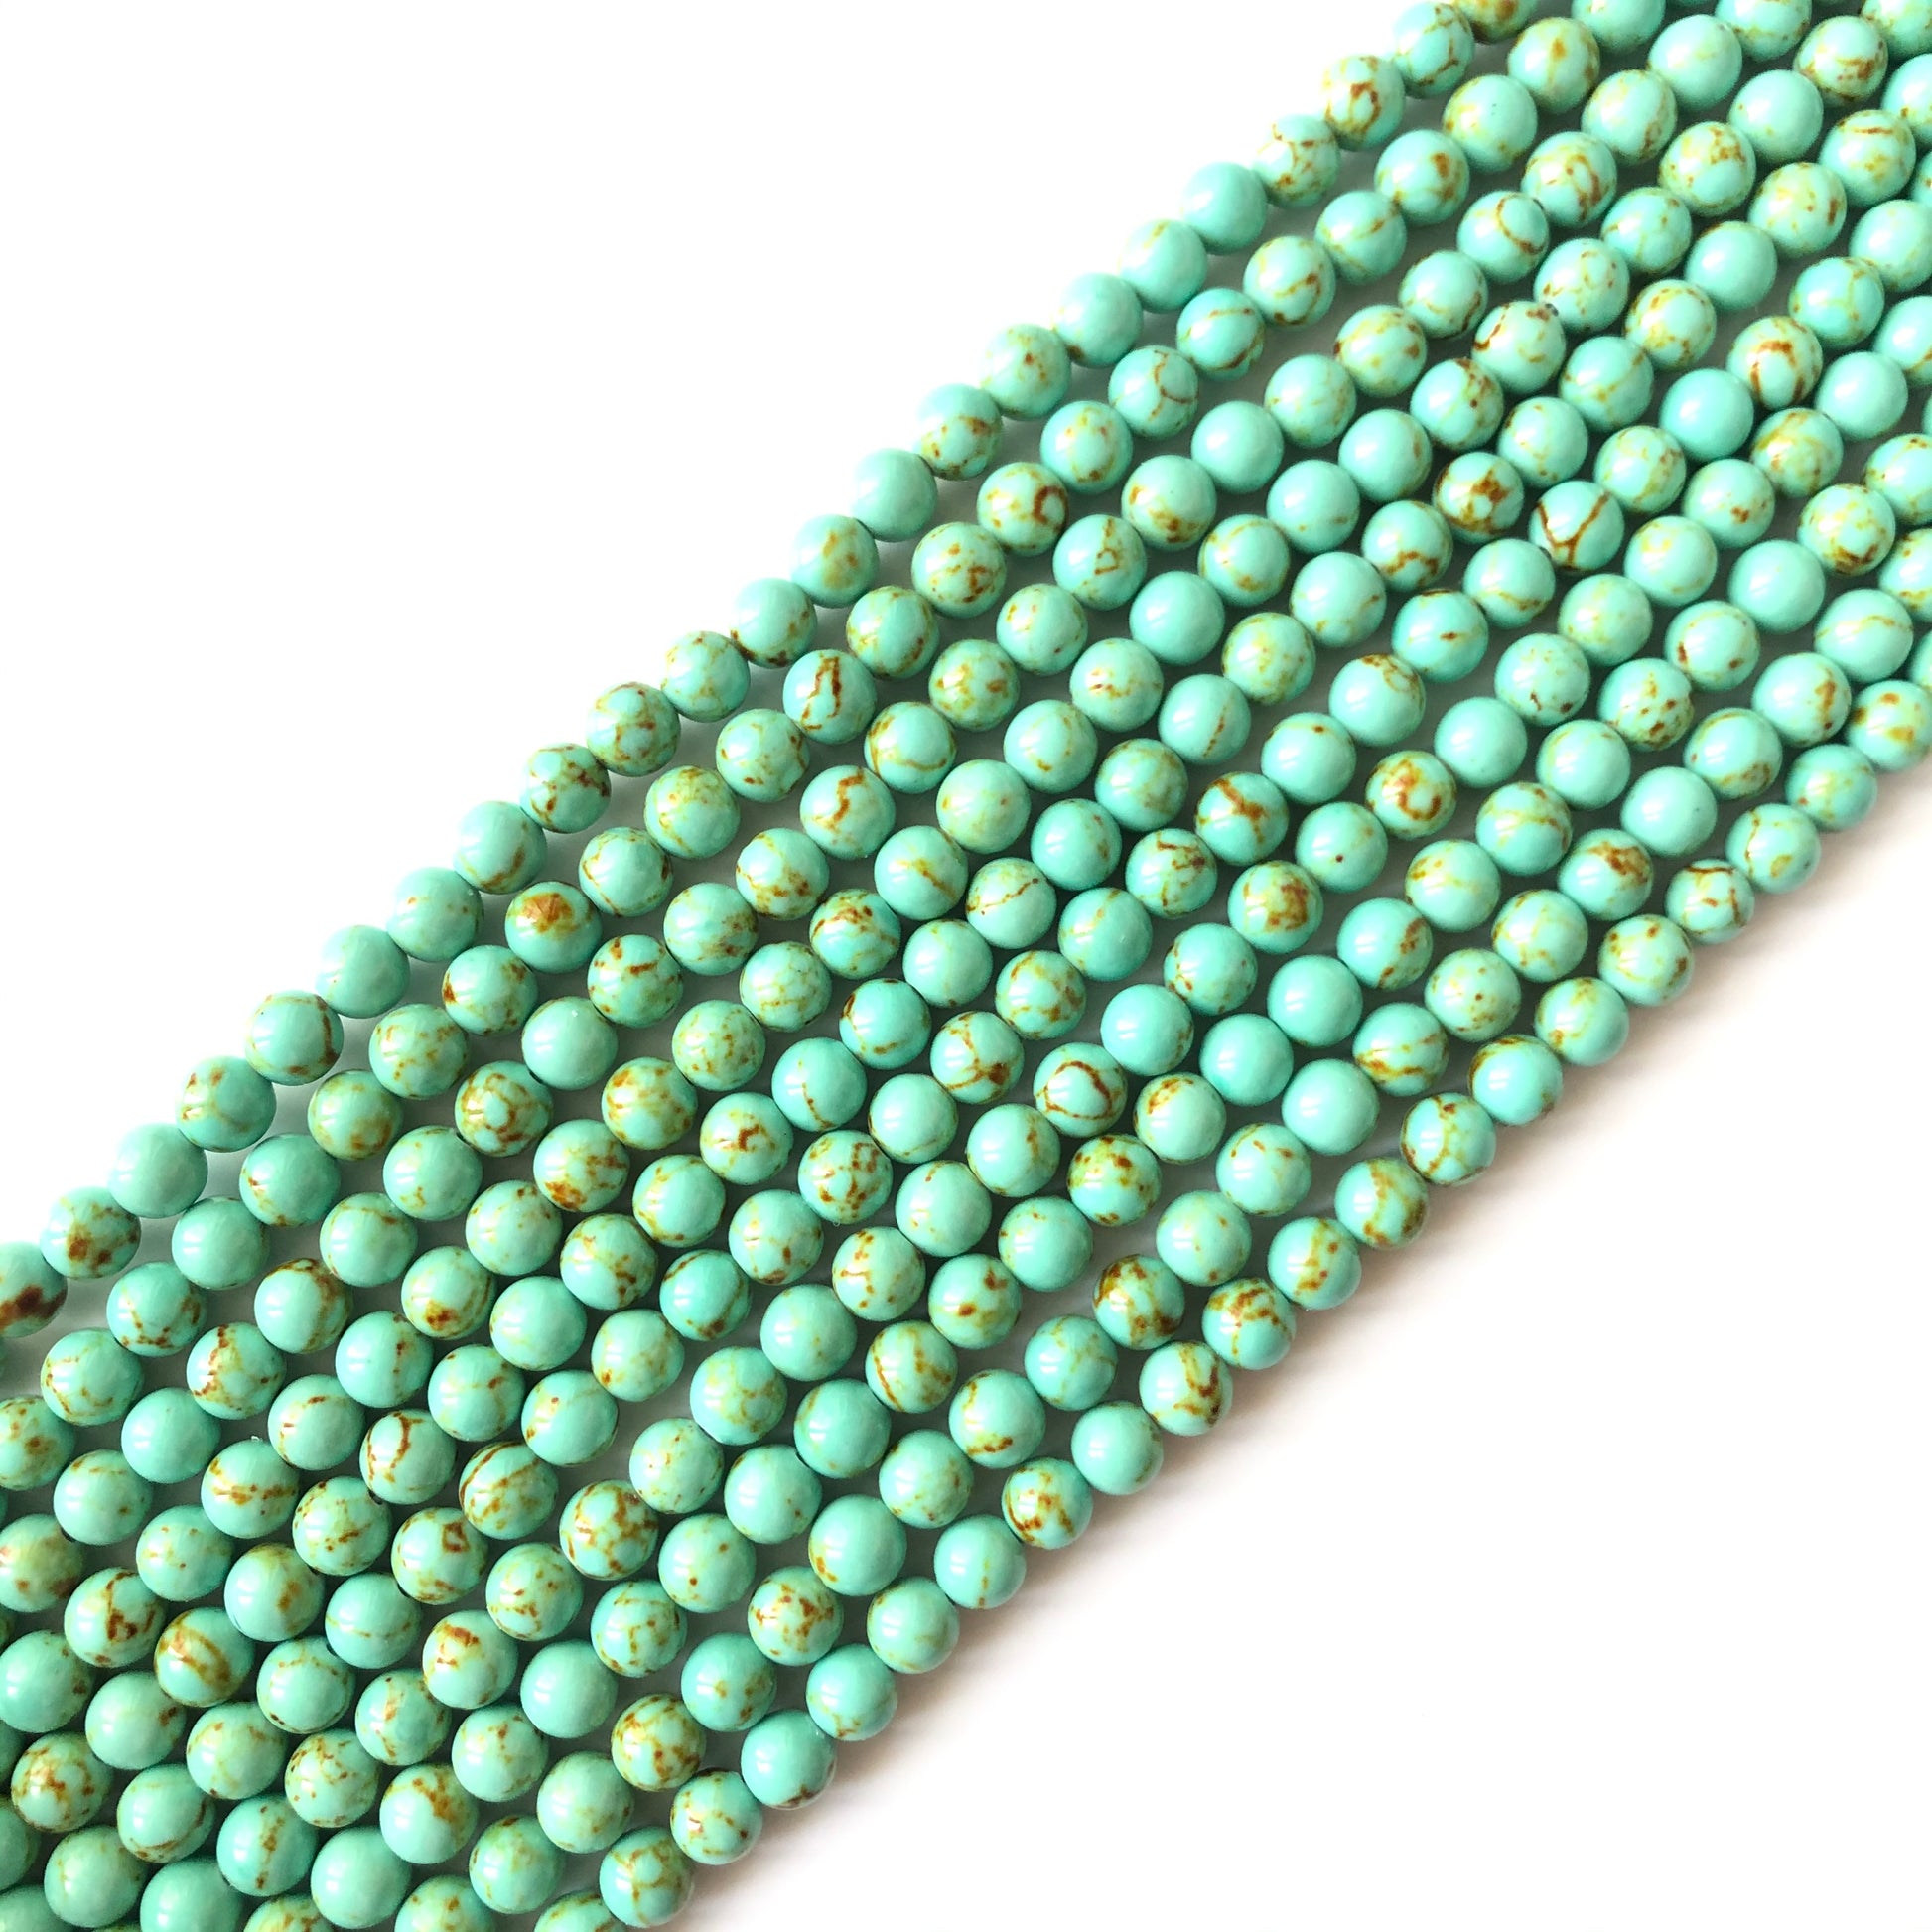 2 Strands/lot 8mm, 10mm Green Natural Turquoises Round Stone Beads Stone Beads 8mm Stone Beads Turquoise Beads Charms Beads Beyond